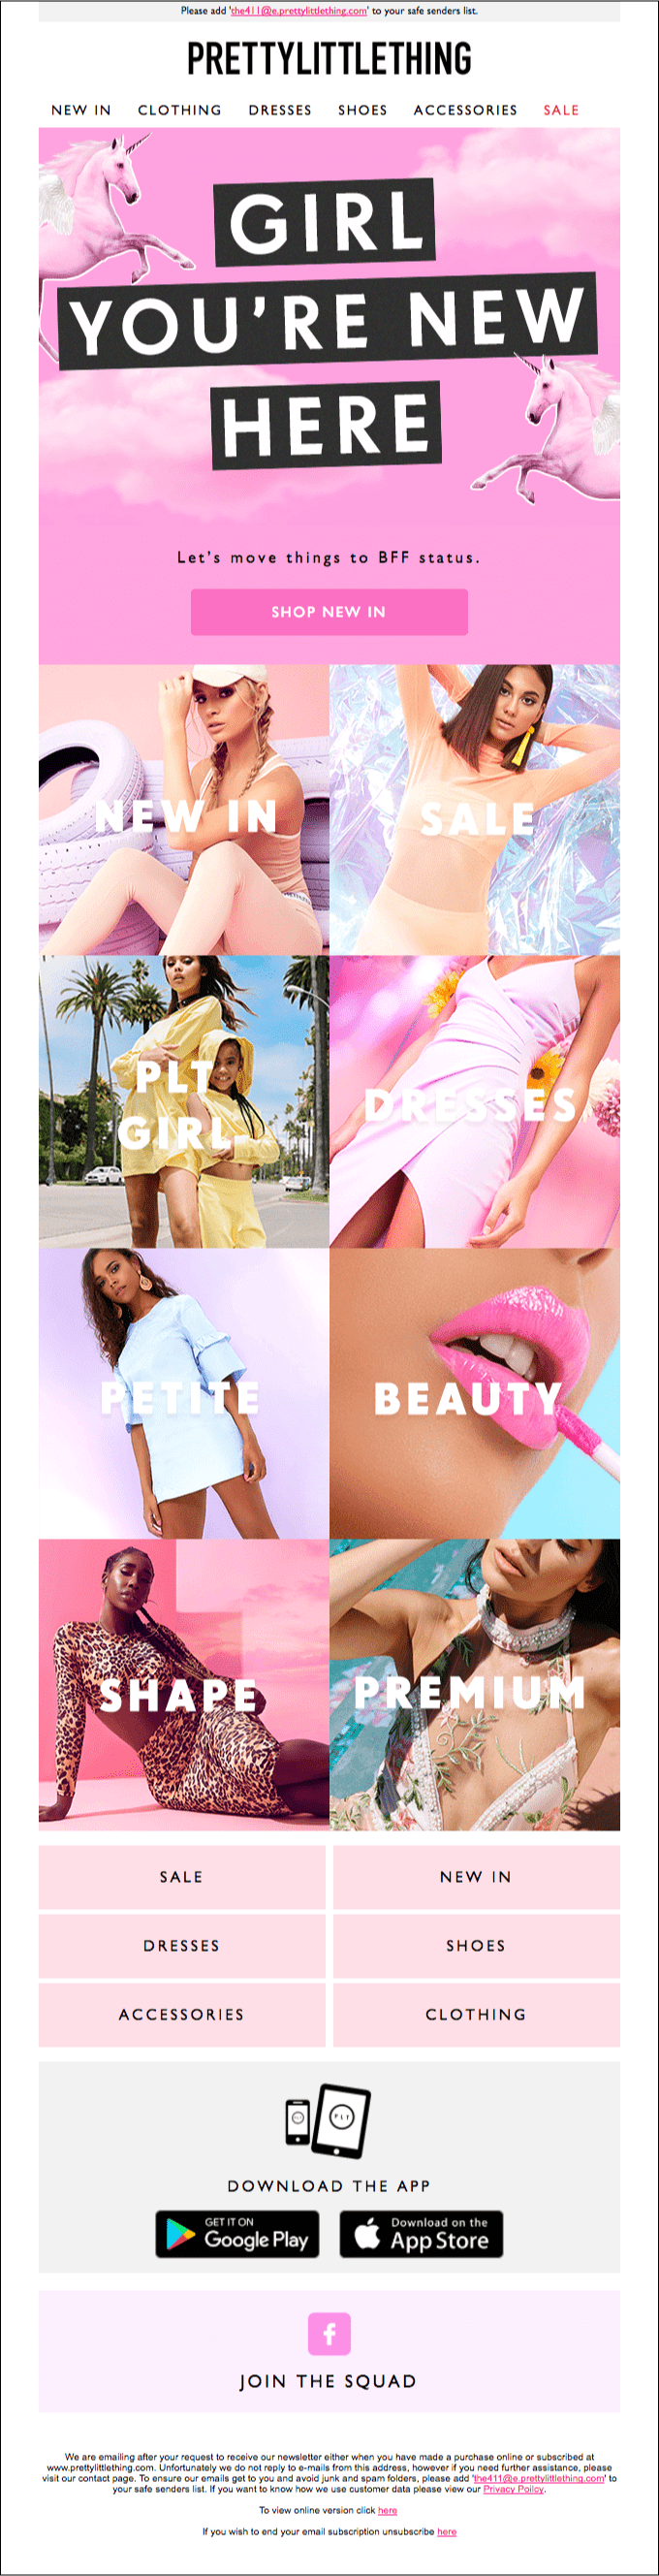 Prettylittlething email